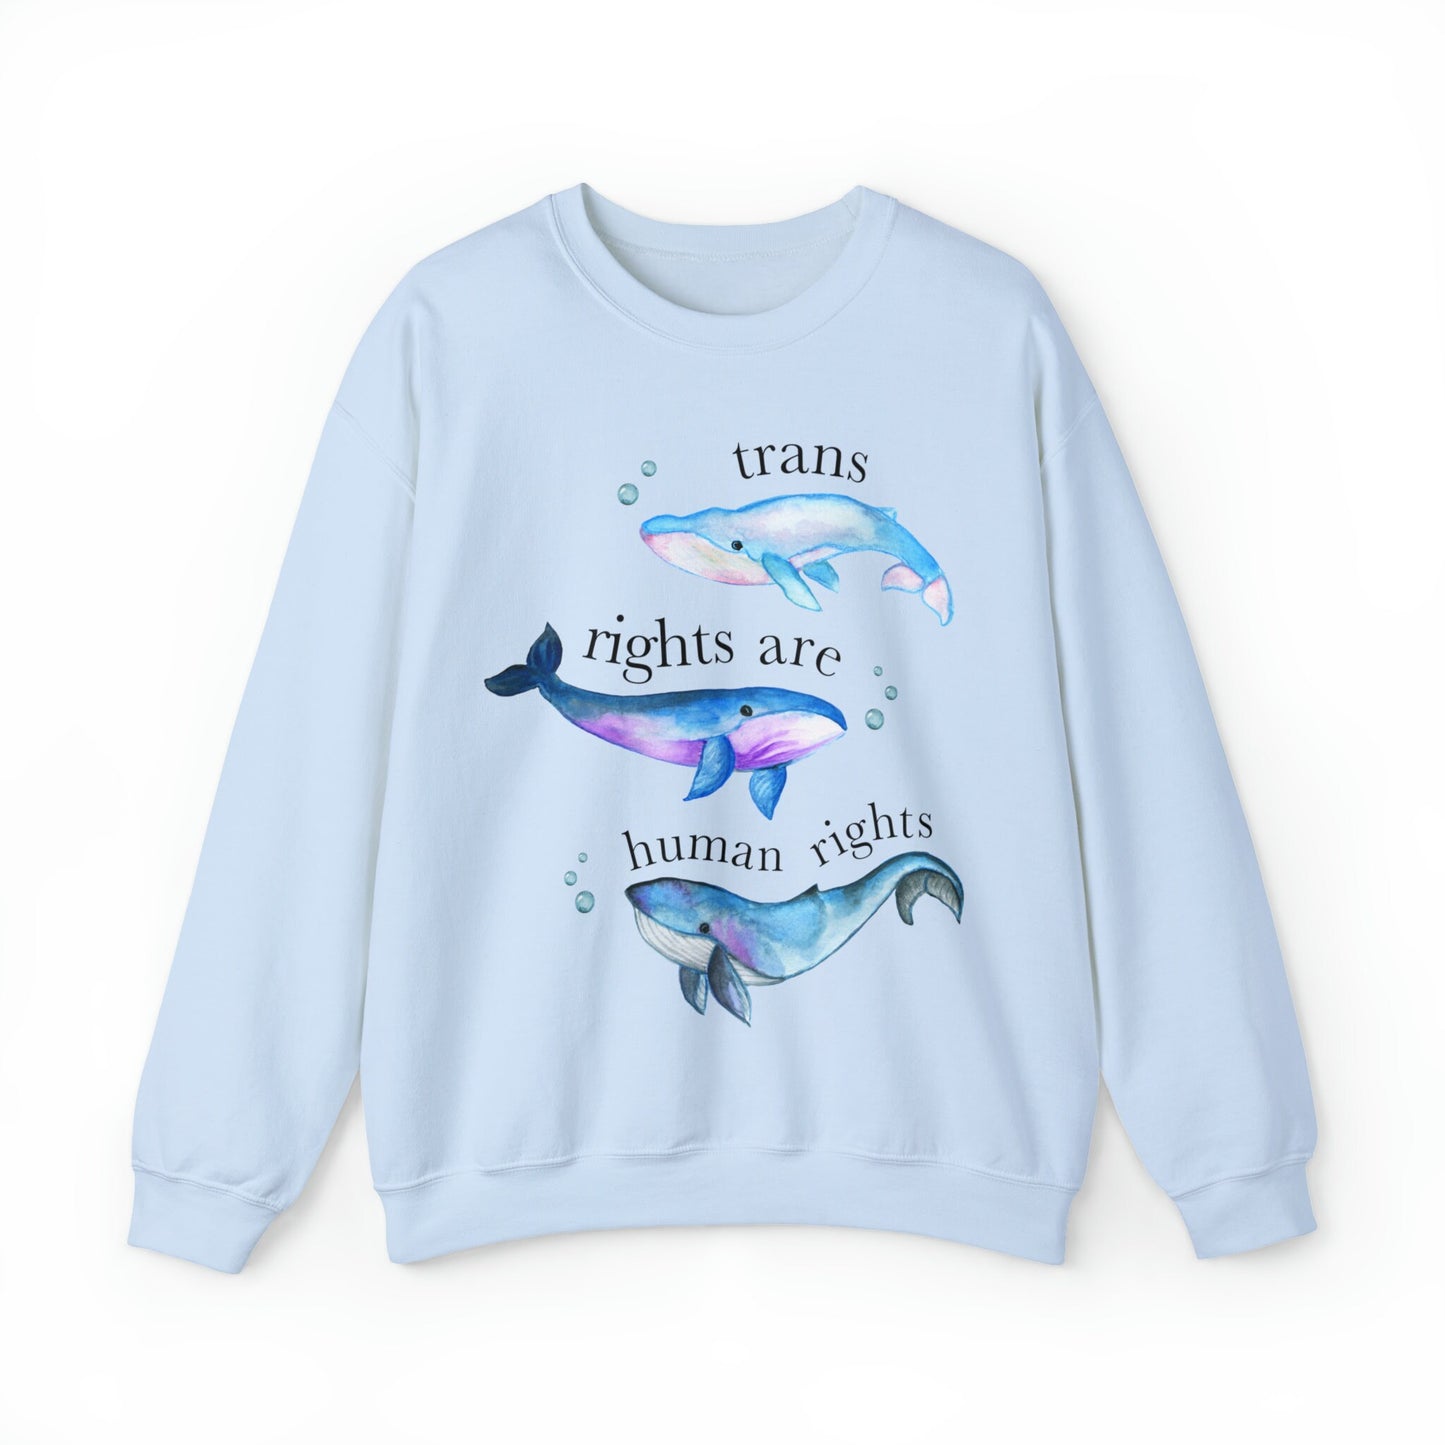 trans rights are human rights sweatshirt